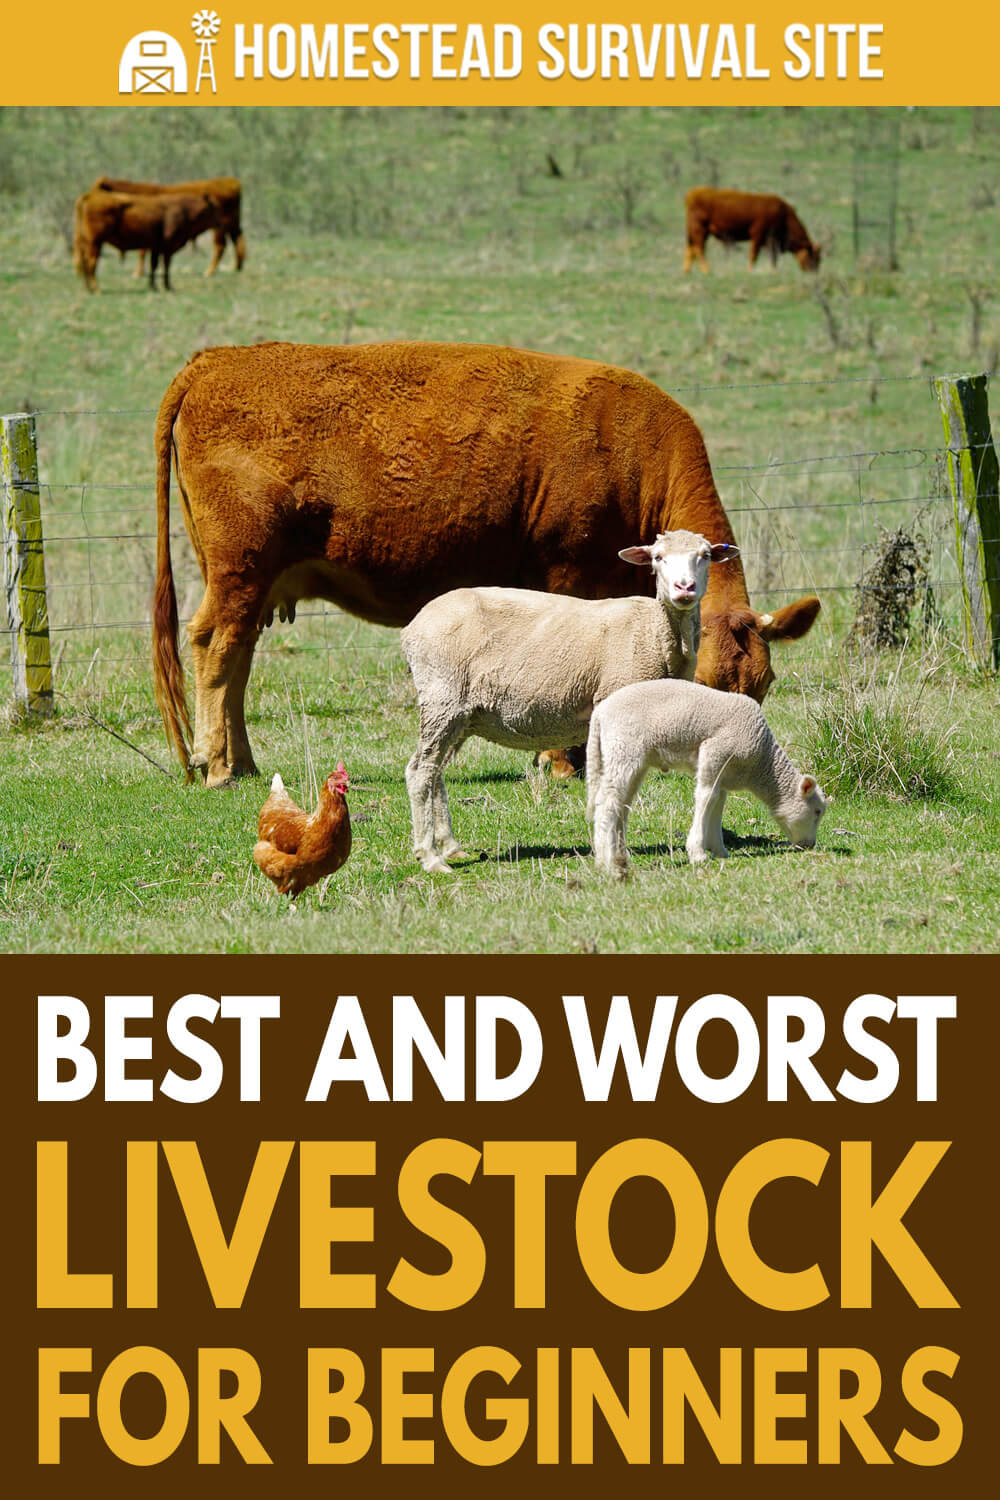 Best and Worst Livestock for Beginners